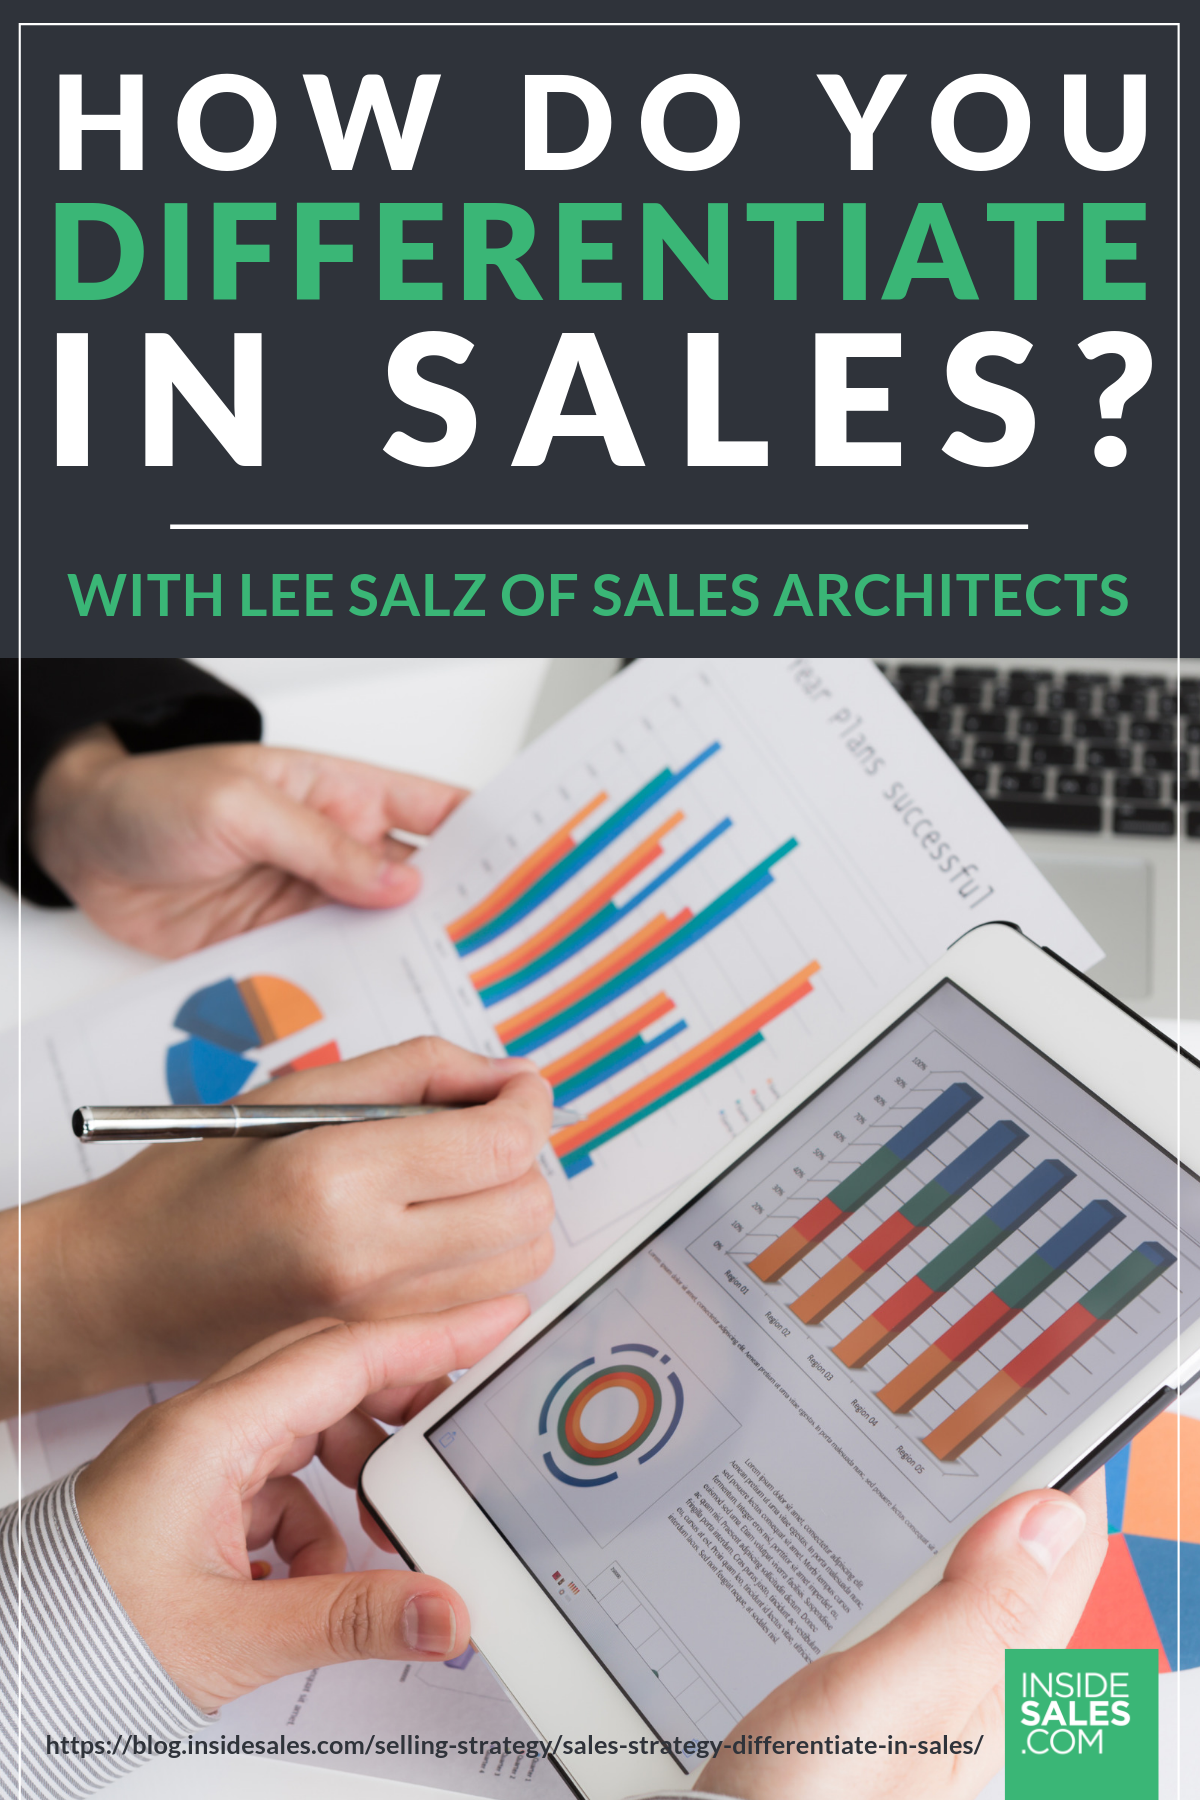 How Do You Differentiate in Sales? w/Lee Salz @Sales Architects https://www.insidesales.com/blog/selling-strategy/sales-strategy-differentiate-in-sales/